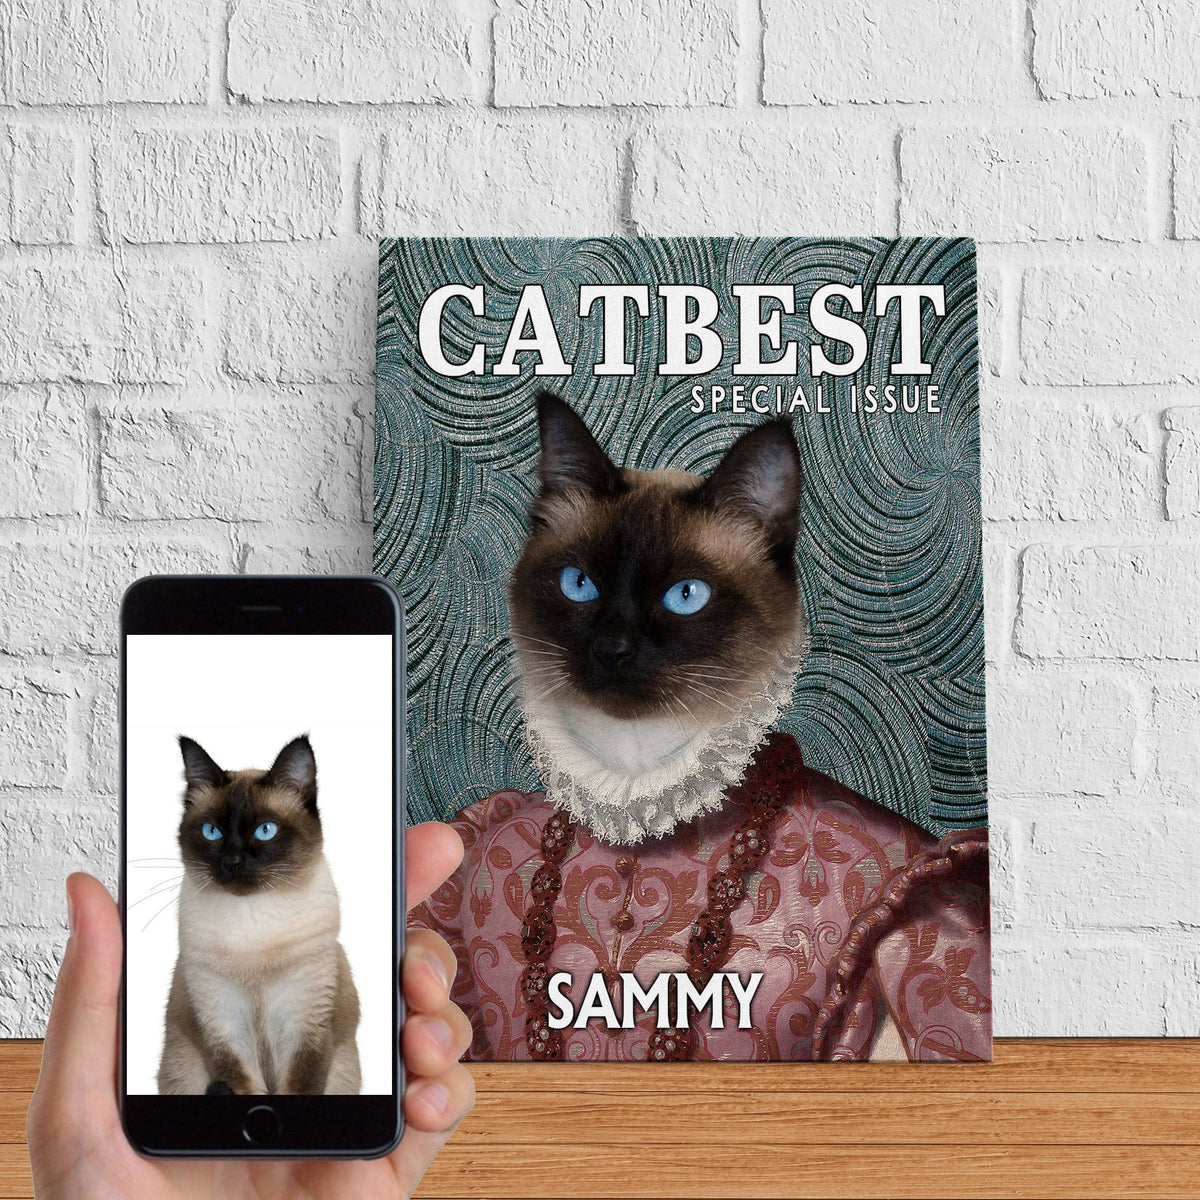 USA MADE Cat Best Personalized Pet Poster Canvas Print | Personalized Dog Cat Prints | Magazine Covers | Custom Pet Portrait from Photo | Personalized Gifts for Cat Mom or Dad, Pet Memorial Gift